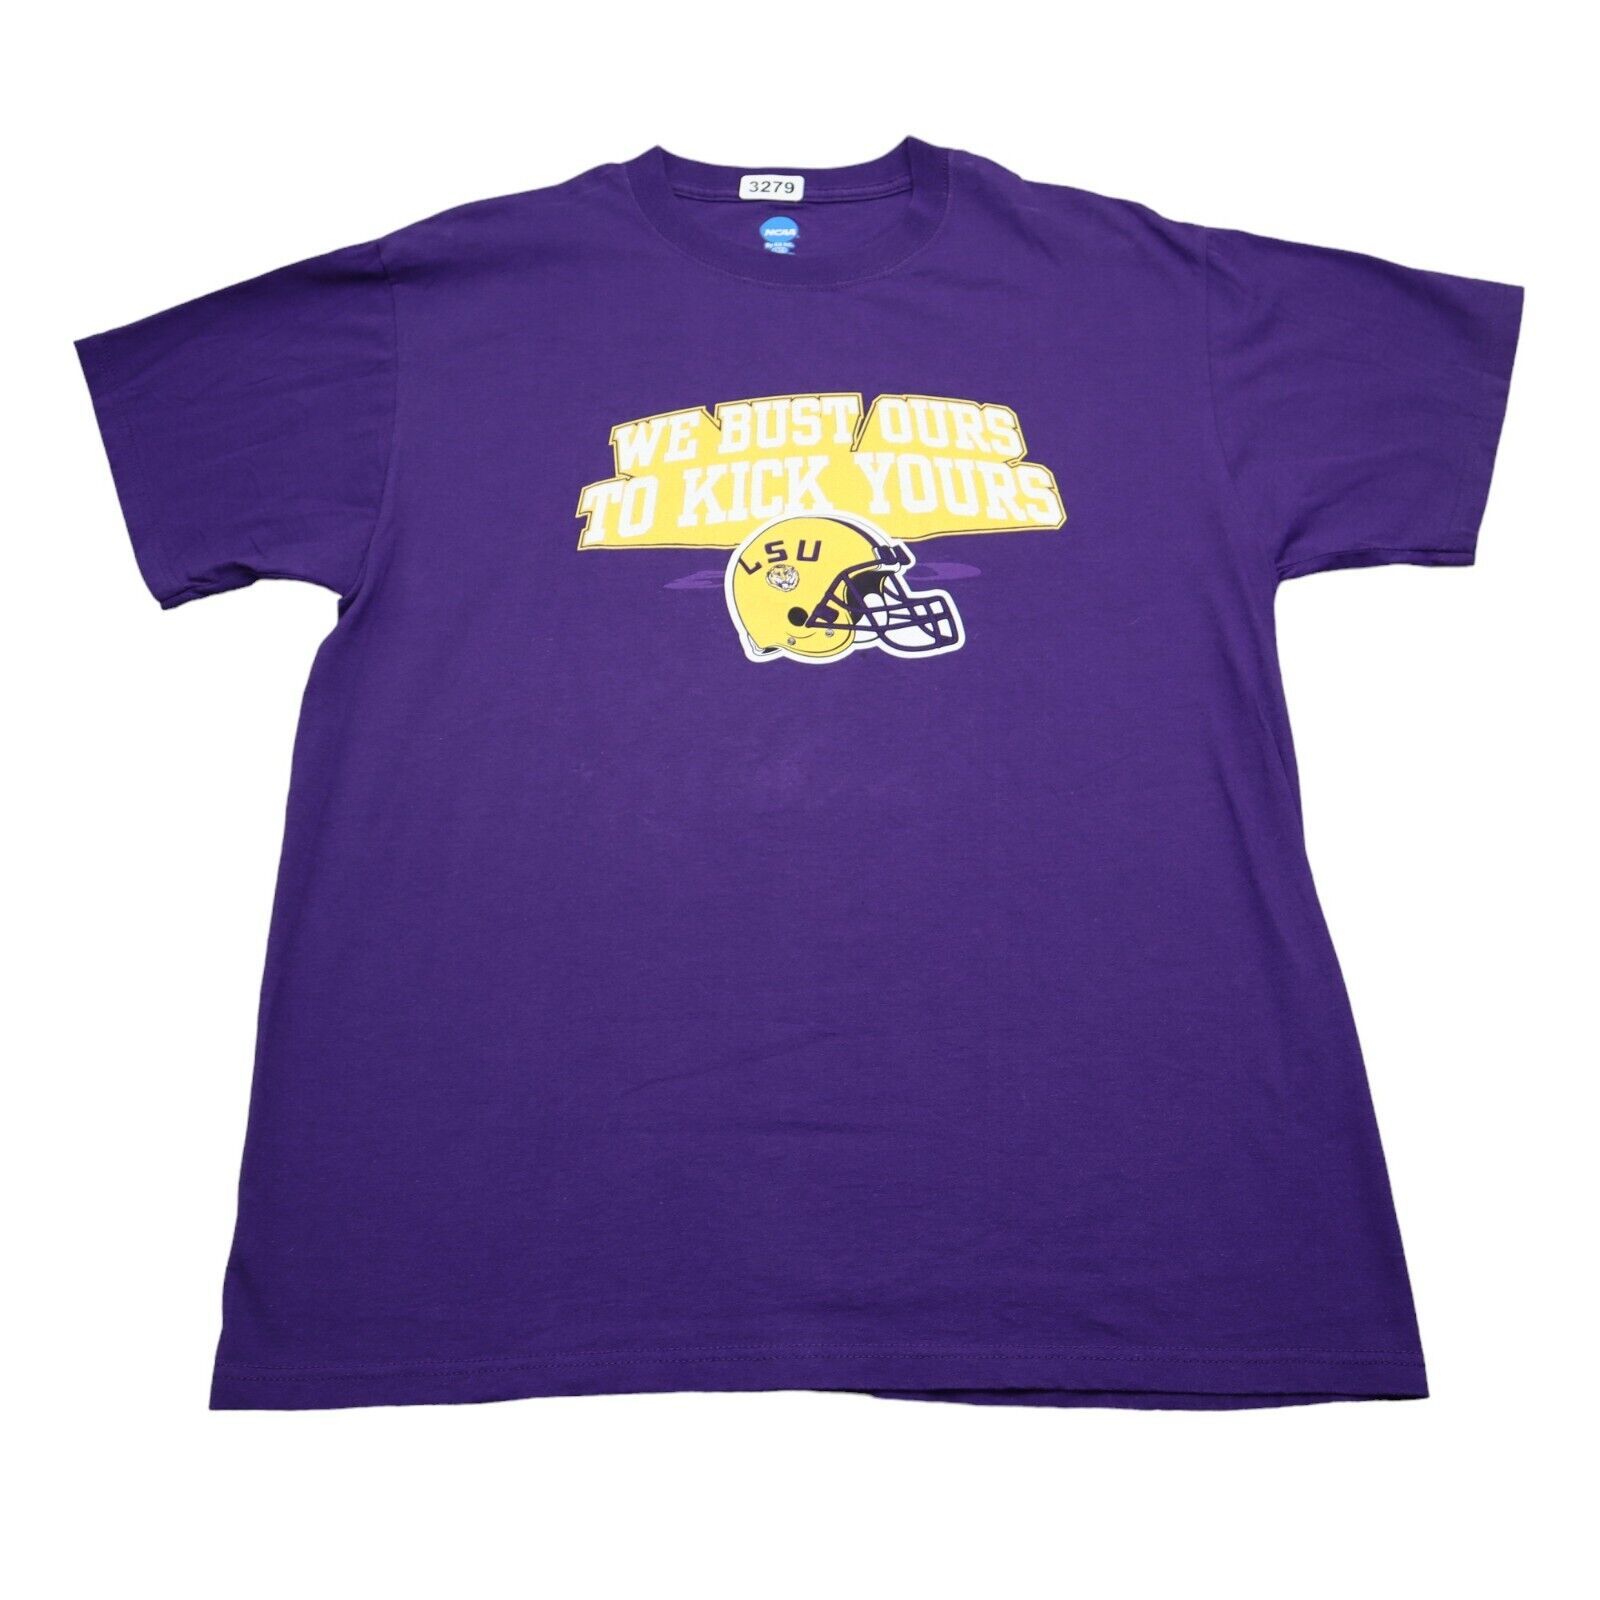 Primary image for LSU Tigers Shirt Mens L Purple Football Bust Ours Kick Yours Graphic Tee 